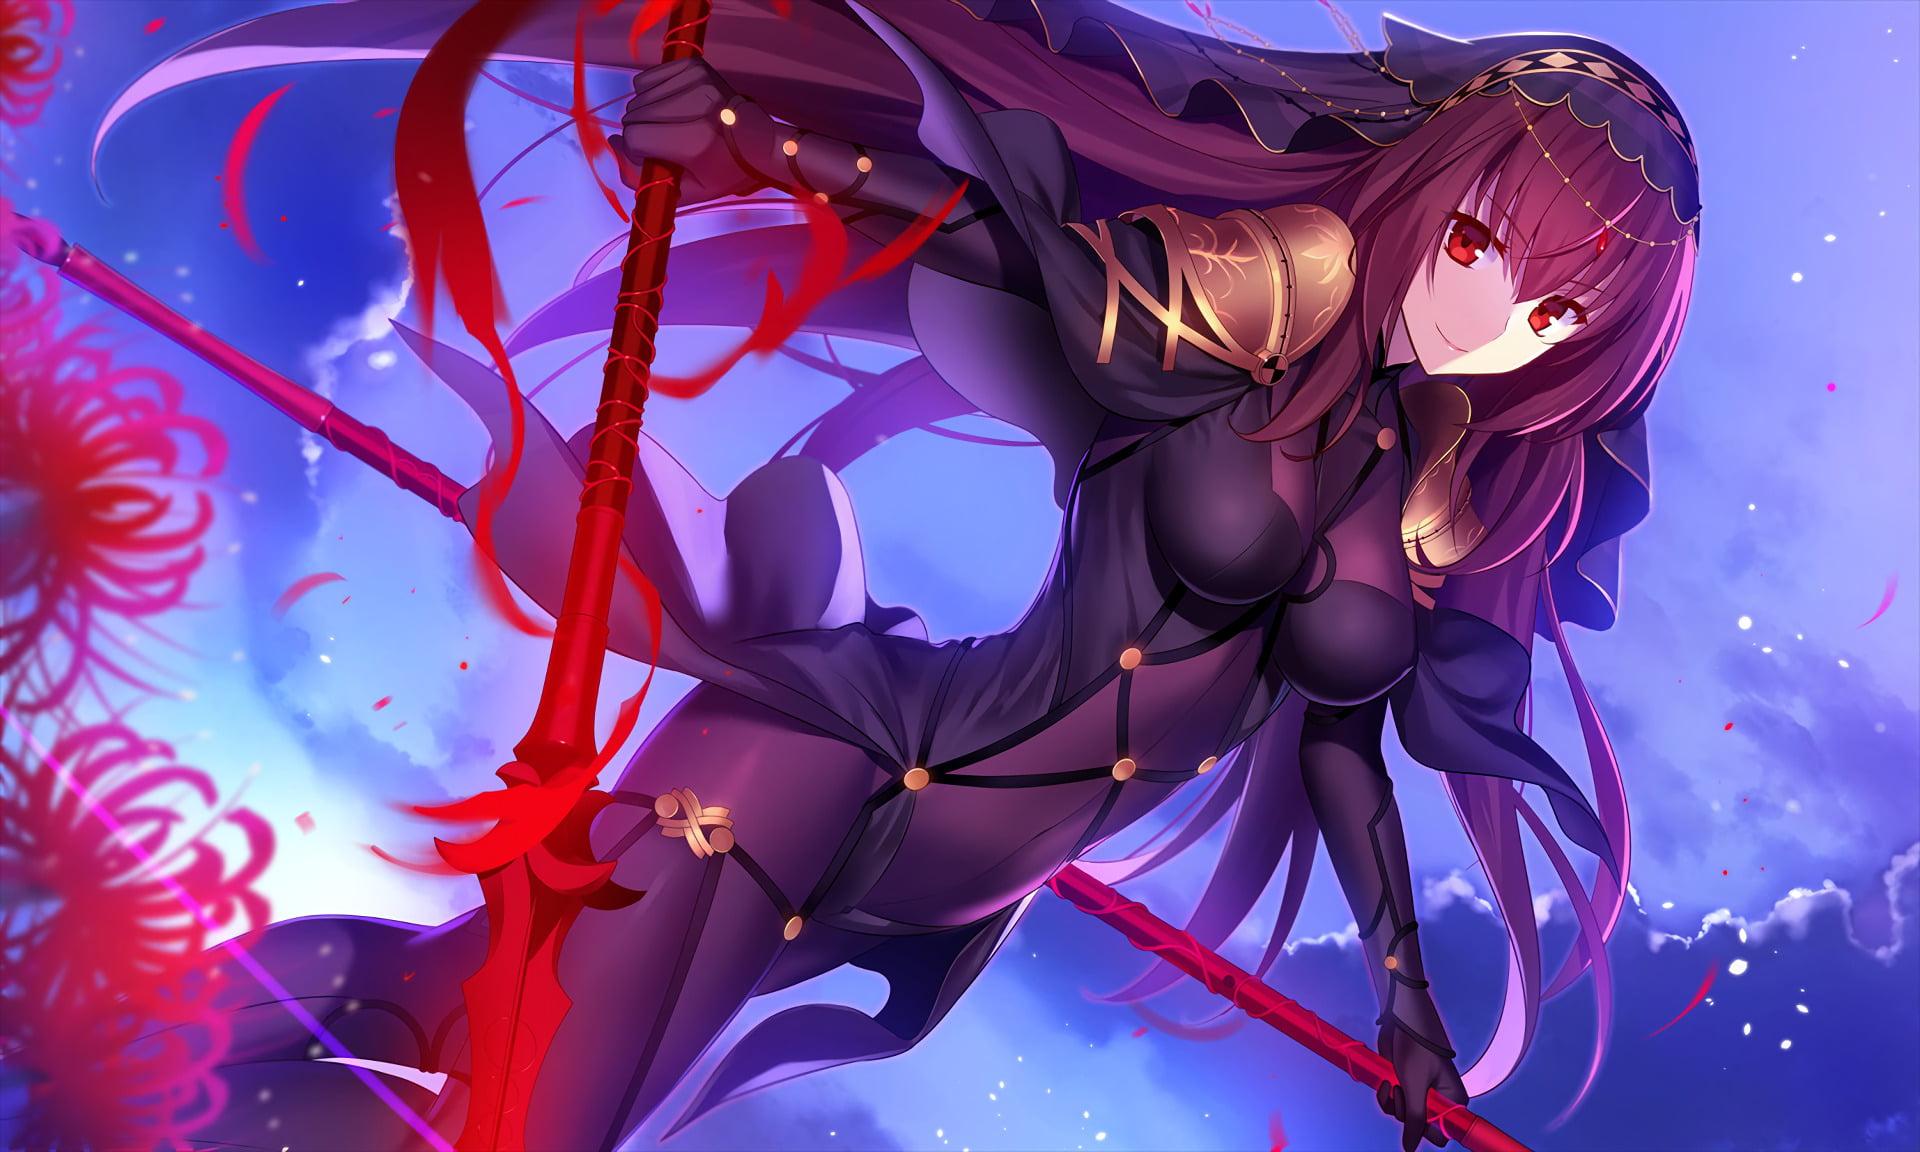 Scathach ( Fate Grand Order ) 1080P, 2K, 4K, 5K HD Wallpaper Free